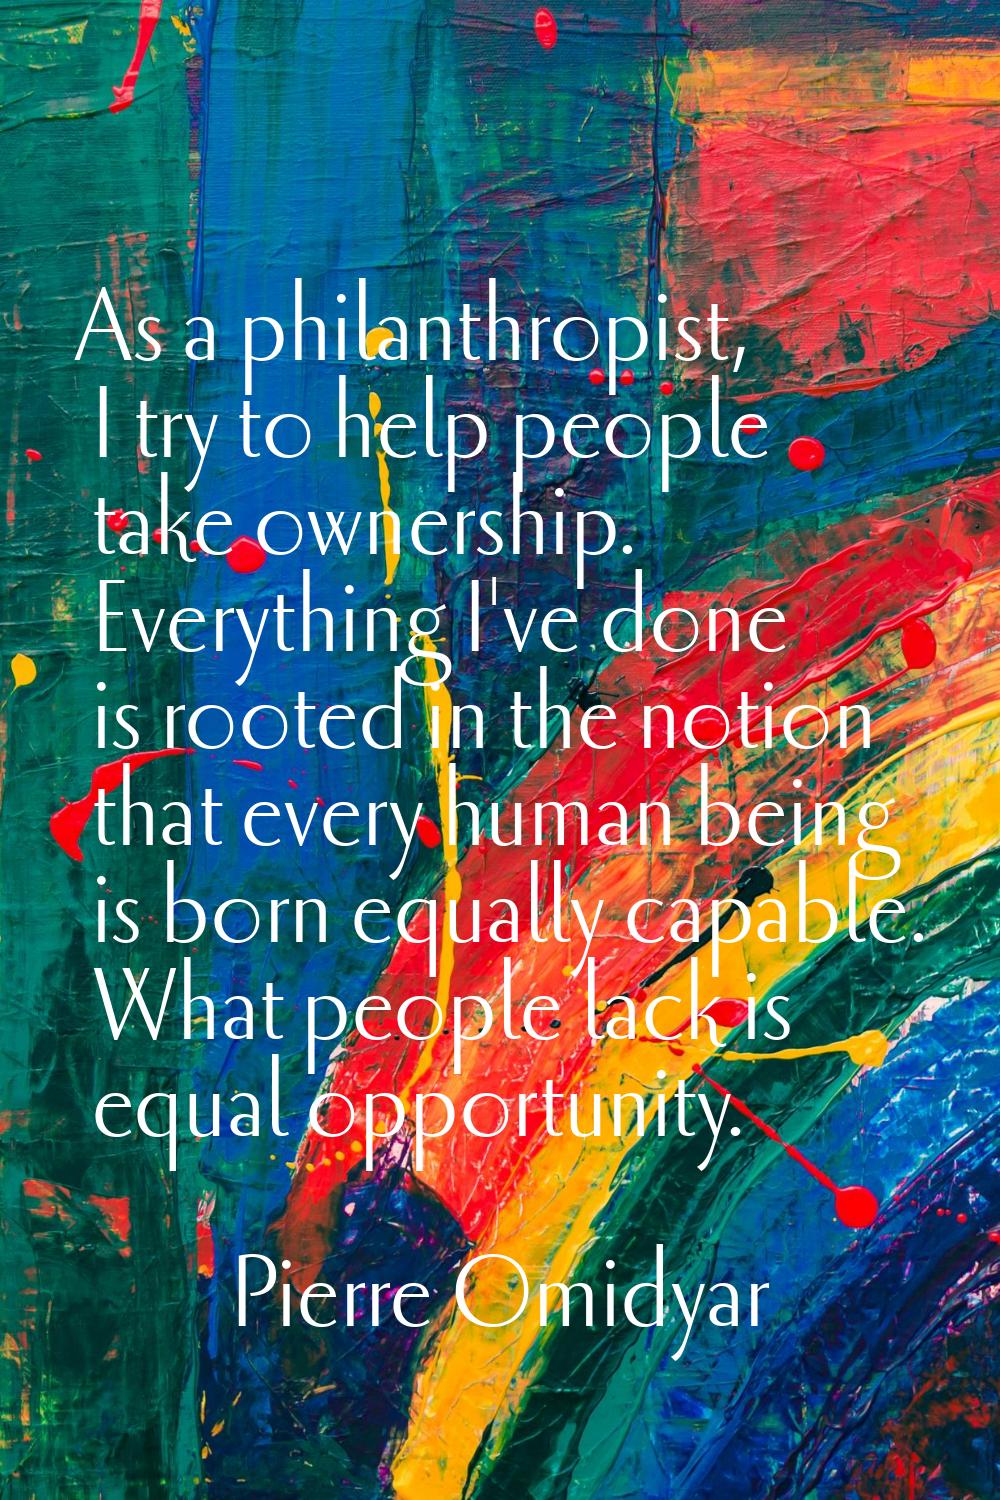 As a philanthropist, I try to help people take ownership. Everything I've done is rooted in the not